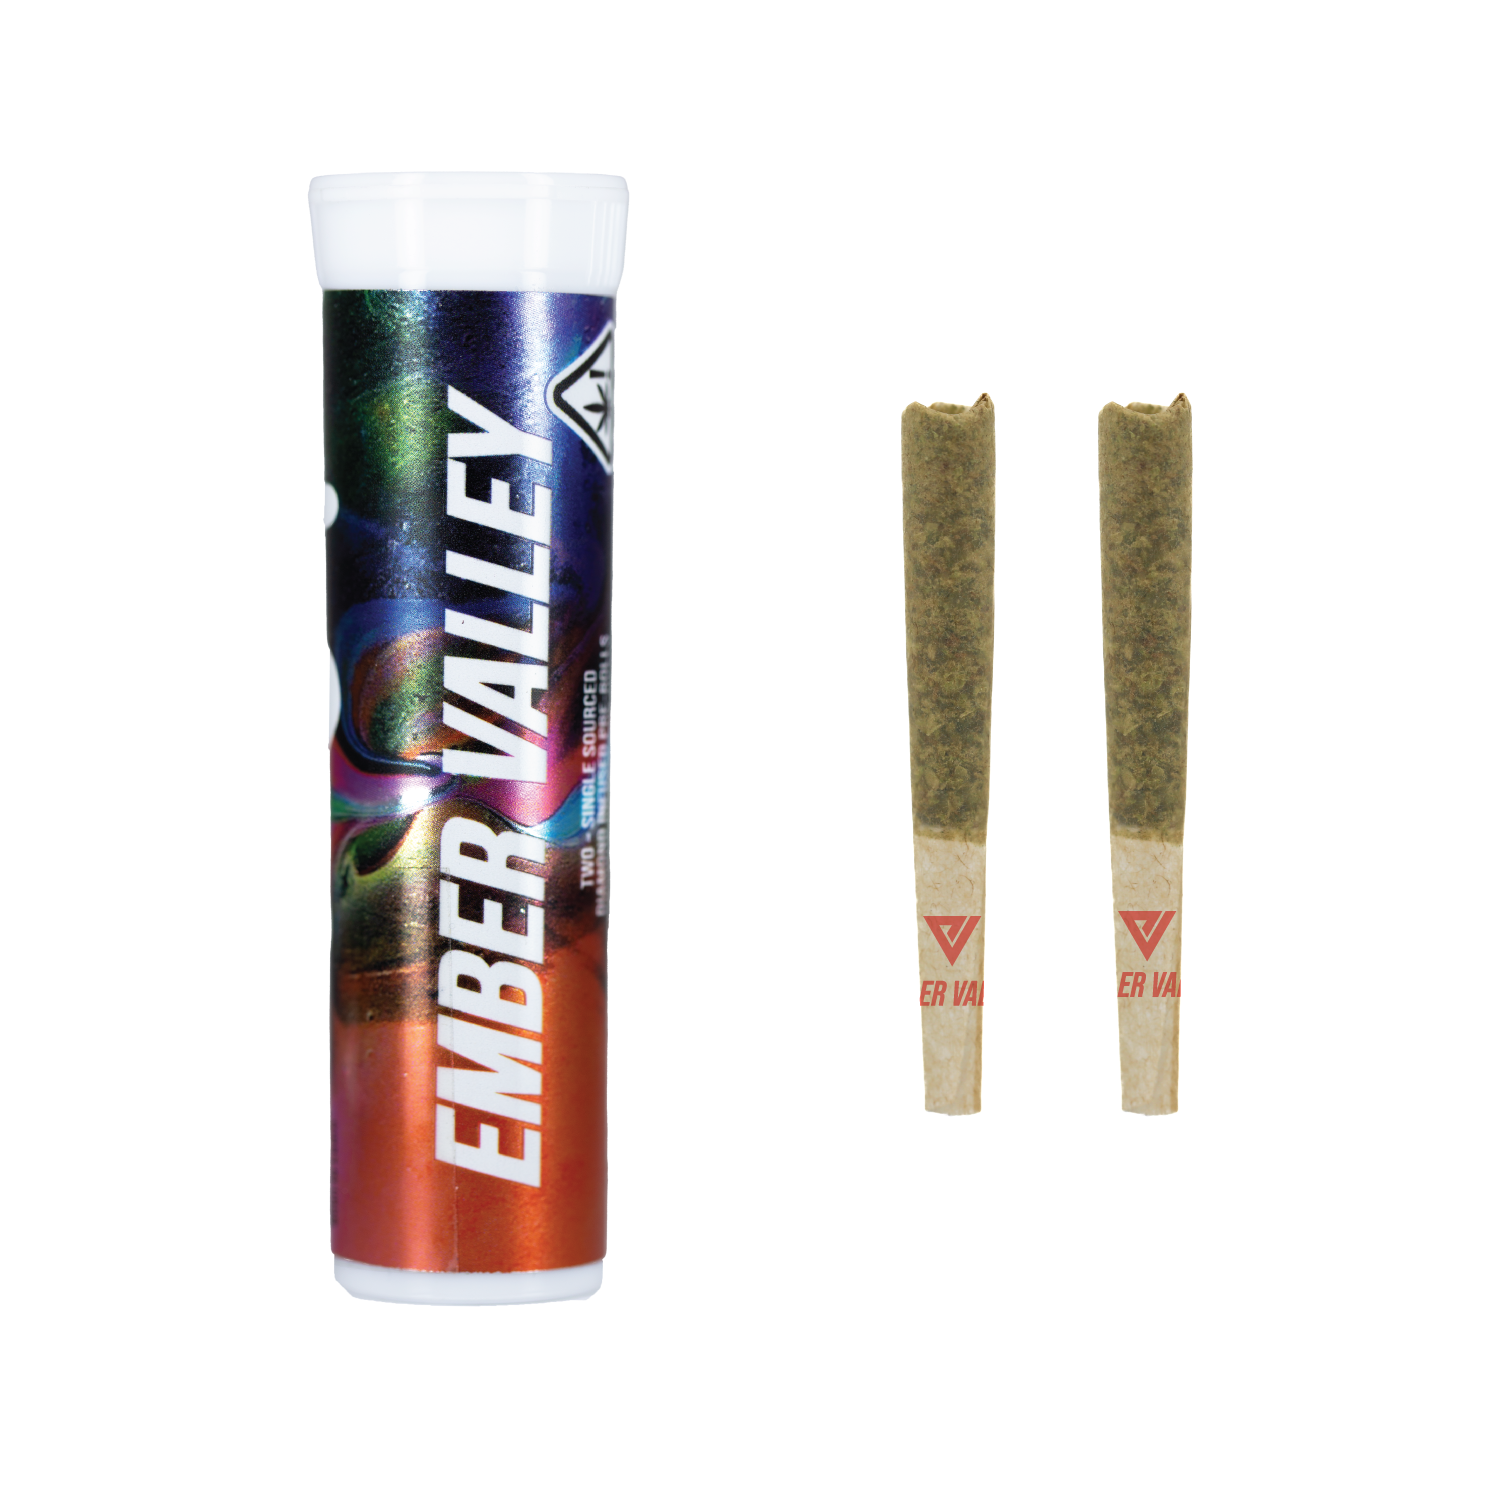 Zerealz Infused Pre-Roll 2 Pack [.5G]